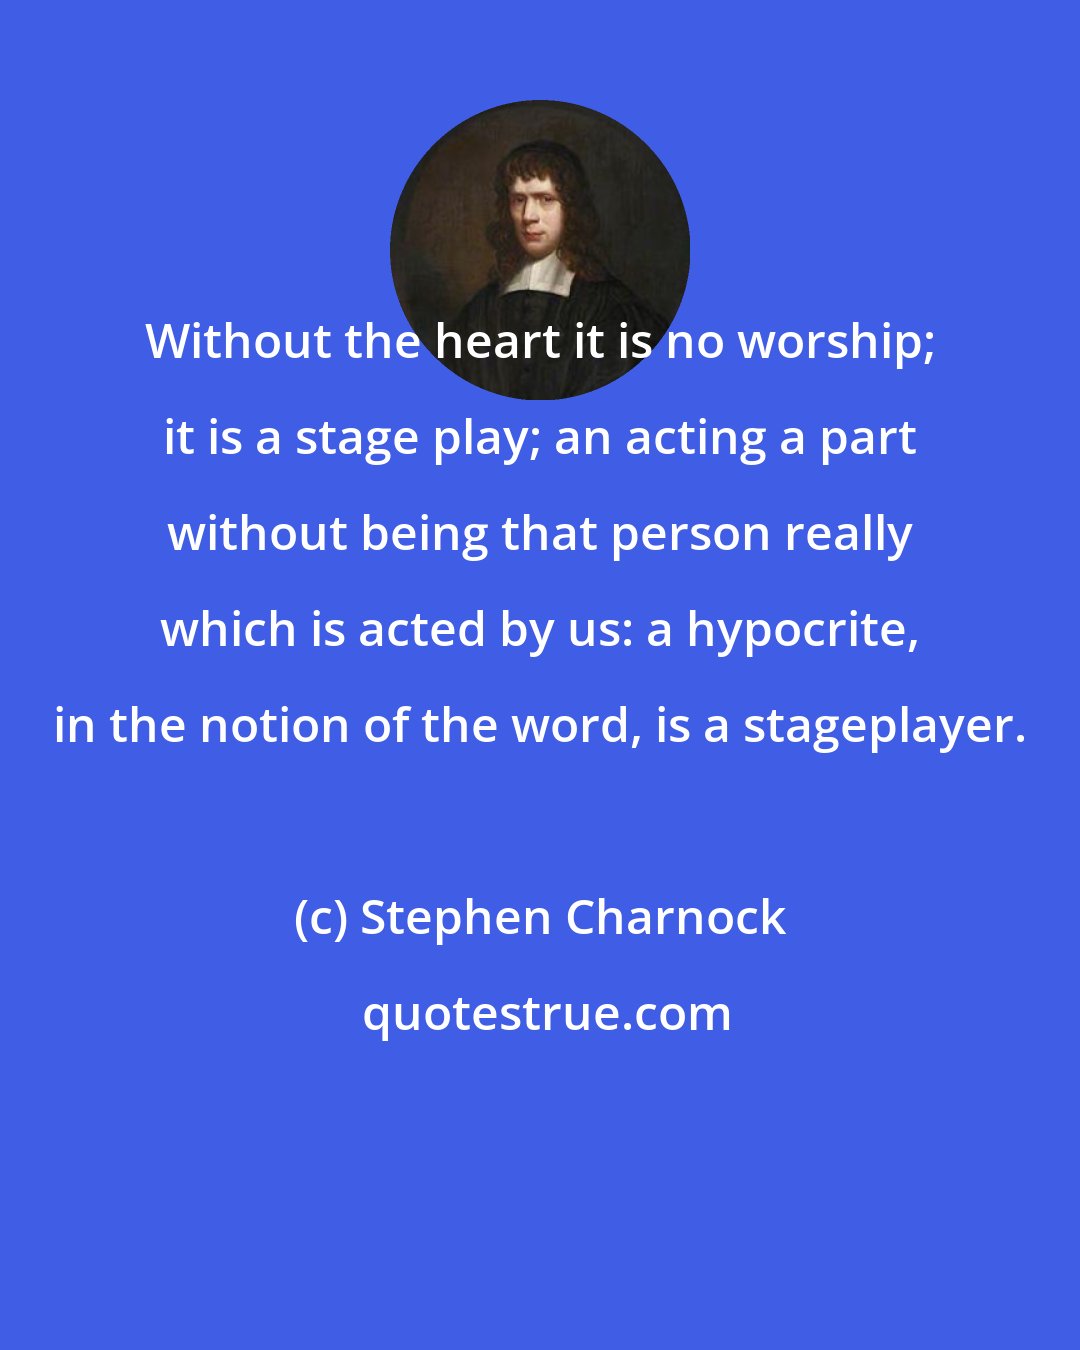 Stephen Charnock: Without the heart it is no worship; it is a stage play; an acting a part without being that person really which is acted by us: a hypocrite, in the notion of the word, is a stageplayer.